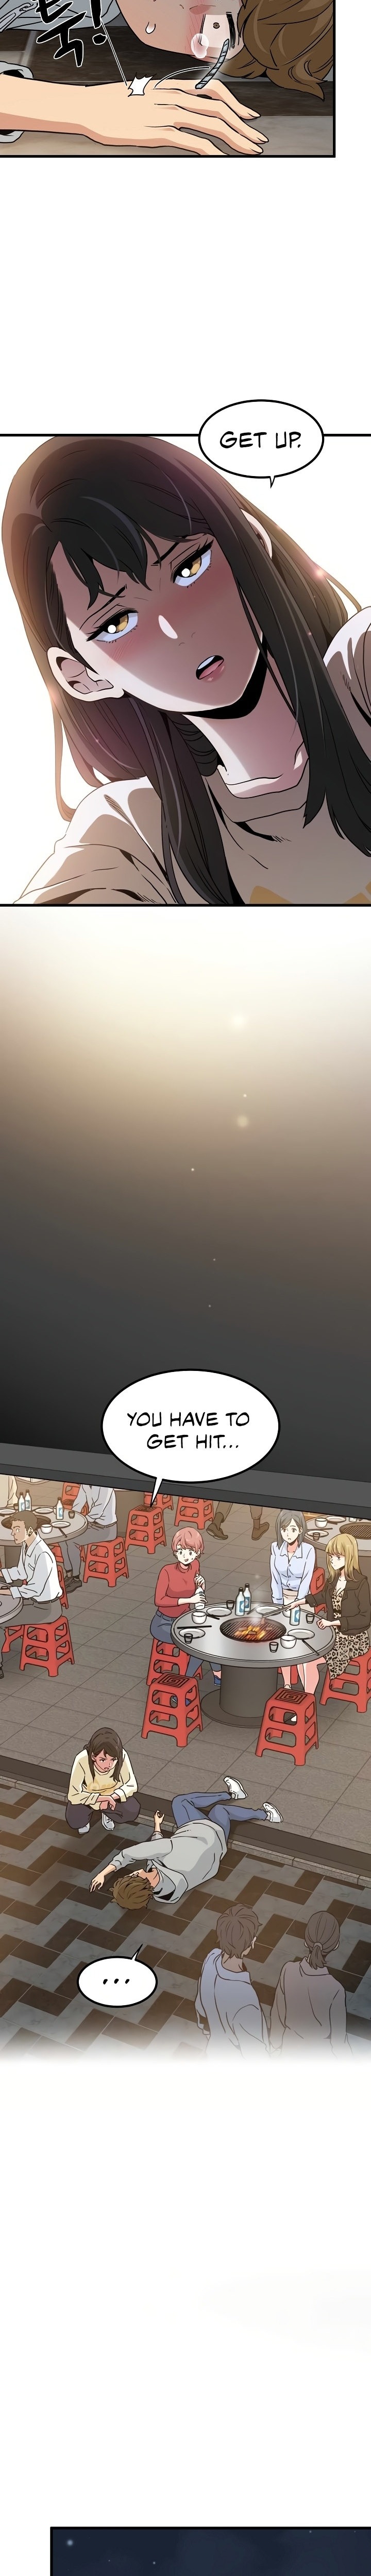 A Turning Point - Chapter 8 Page 13